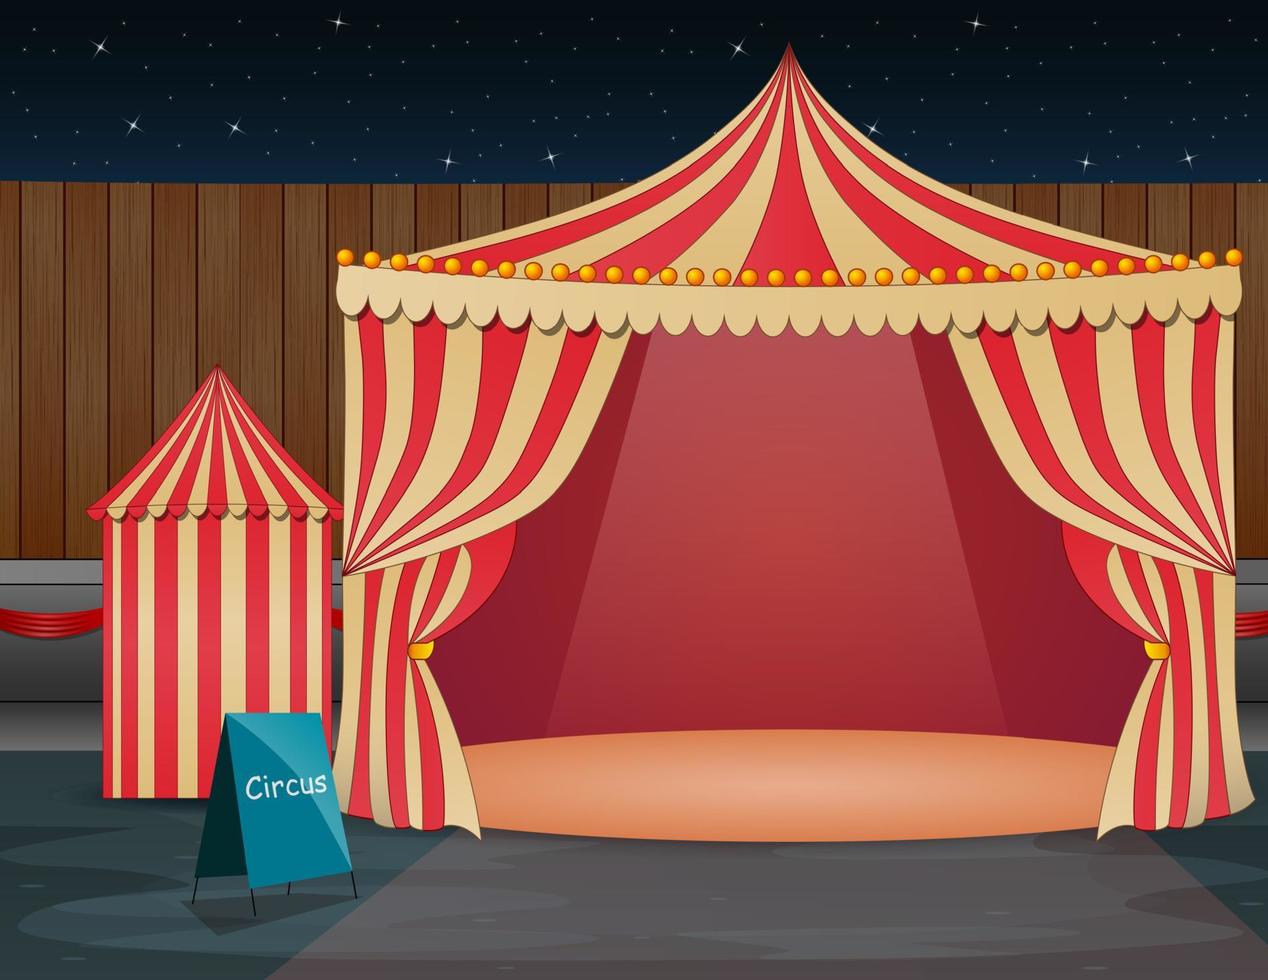 Amusement park at night with open the circus tent